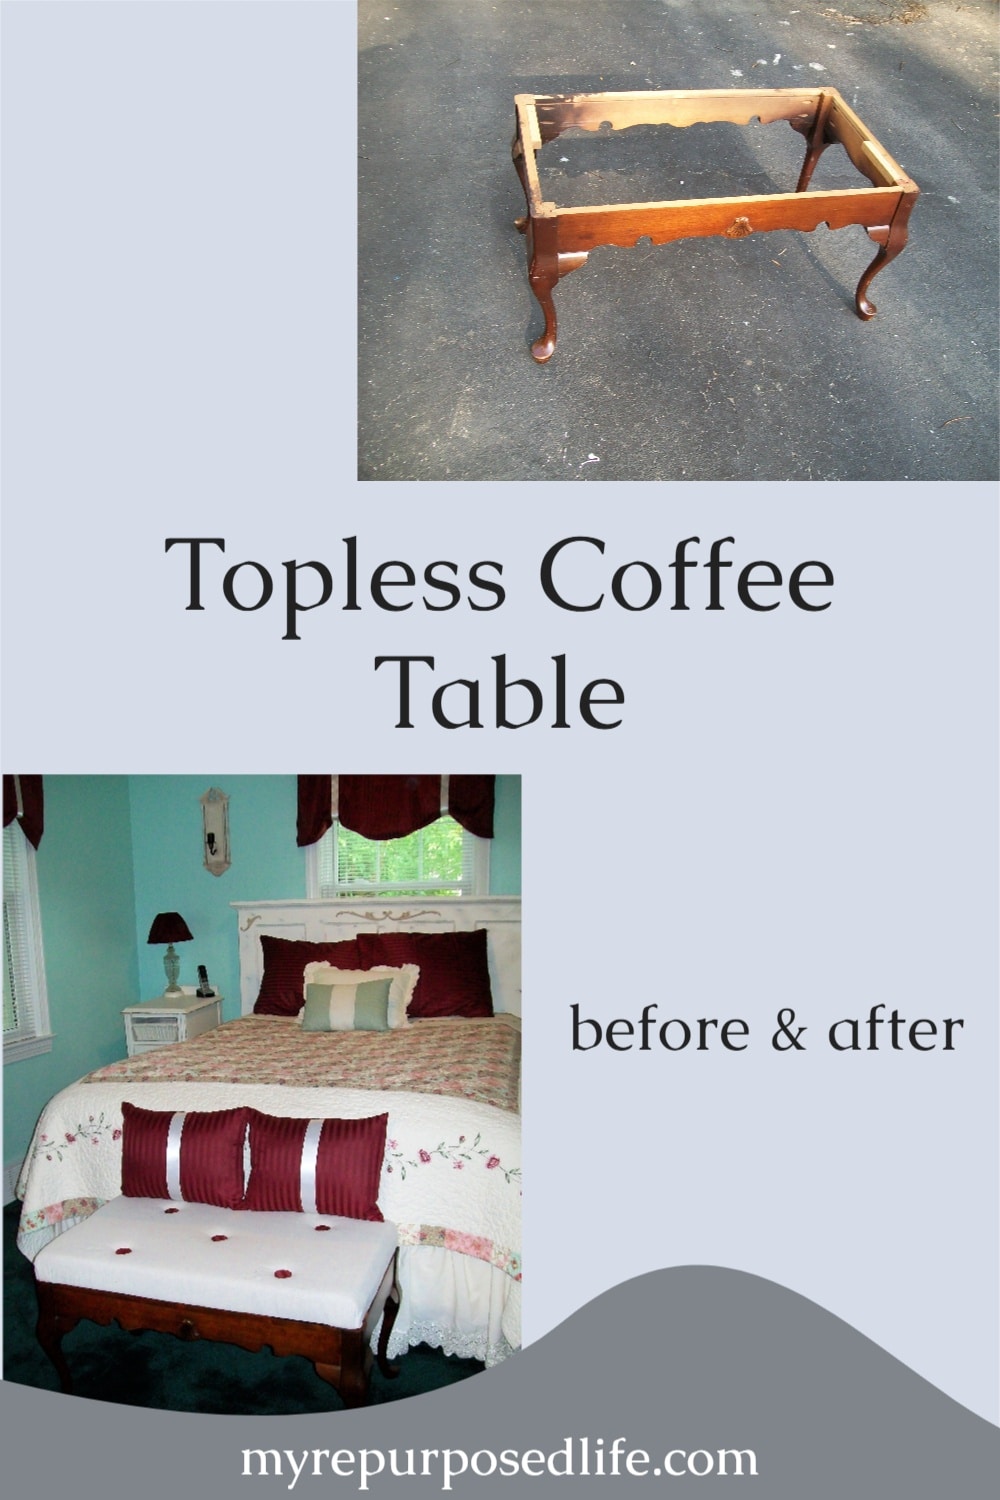 How to use a cheap old coffee table to make a great new coffee table bench for your bedroom. So many tips to do this on the cheap. #MyRepurposedLife #repurposed #furniture #coffeetable #bench she uses this to help her dog jump on and off the bed #brilliant! via @repurposedlife